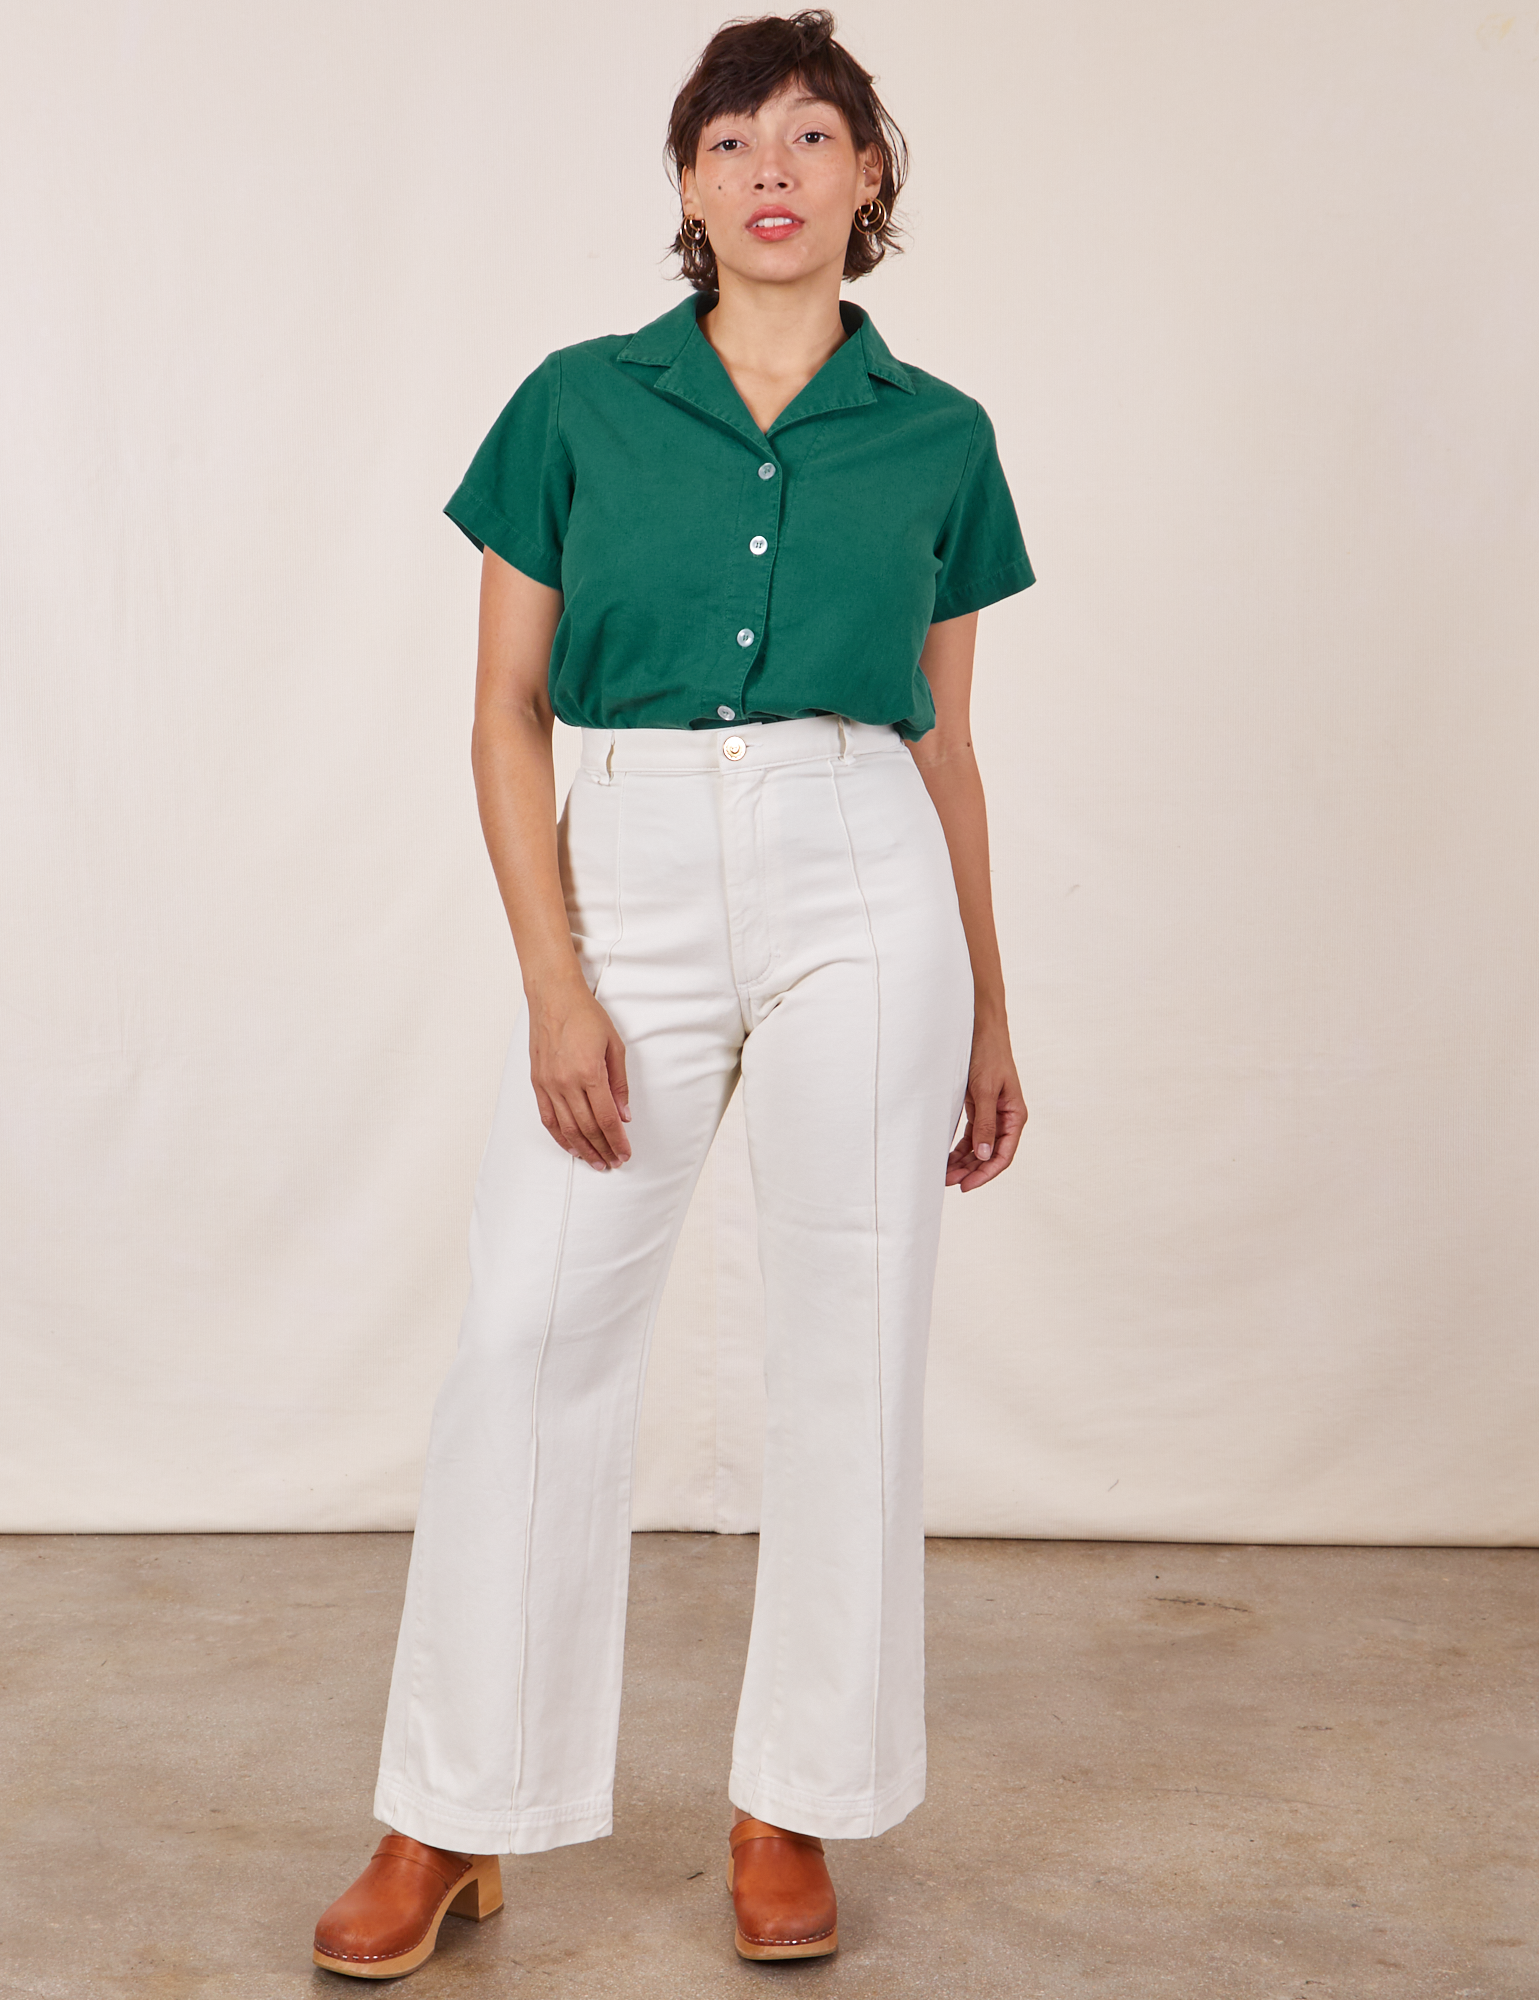 Tiara is wearing Pantry Button-Up in Hunter Green and vintage tee off-white Western Pants